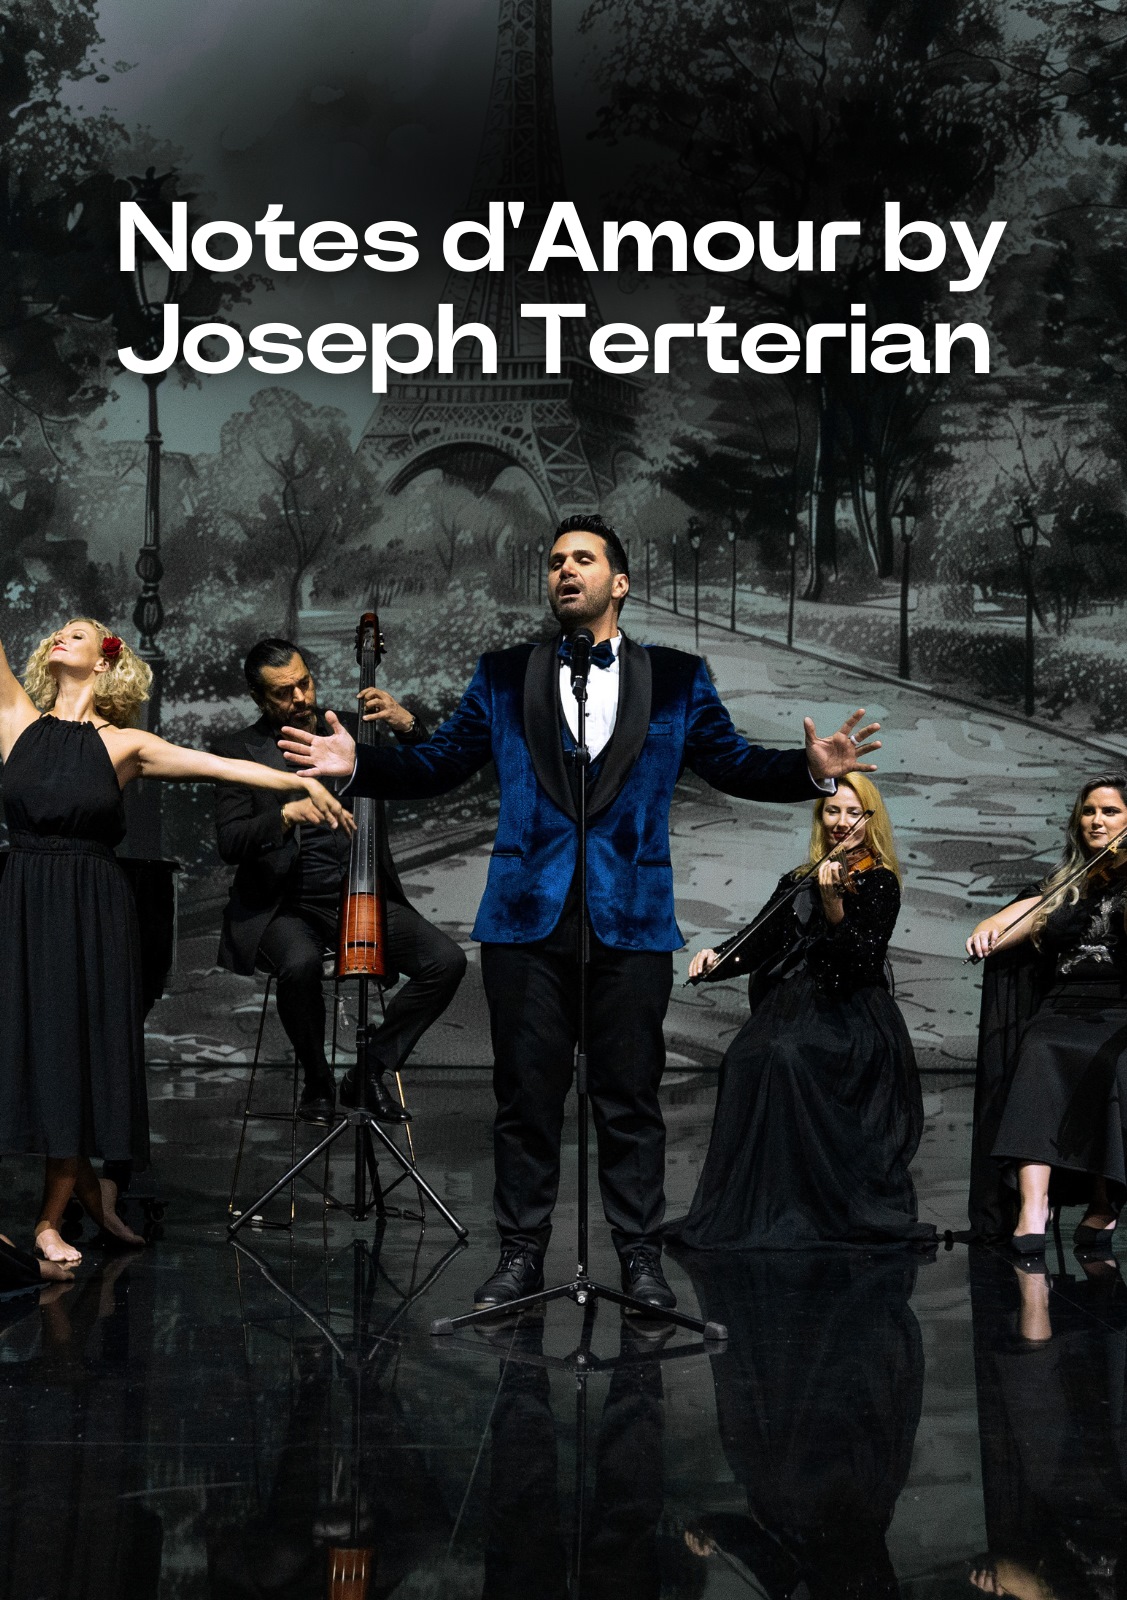 Notes d'Amour by Joseph Terterian